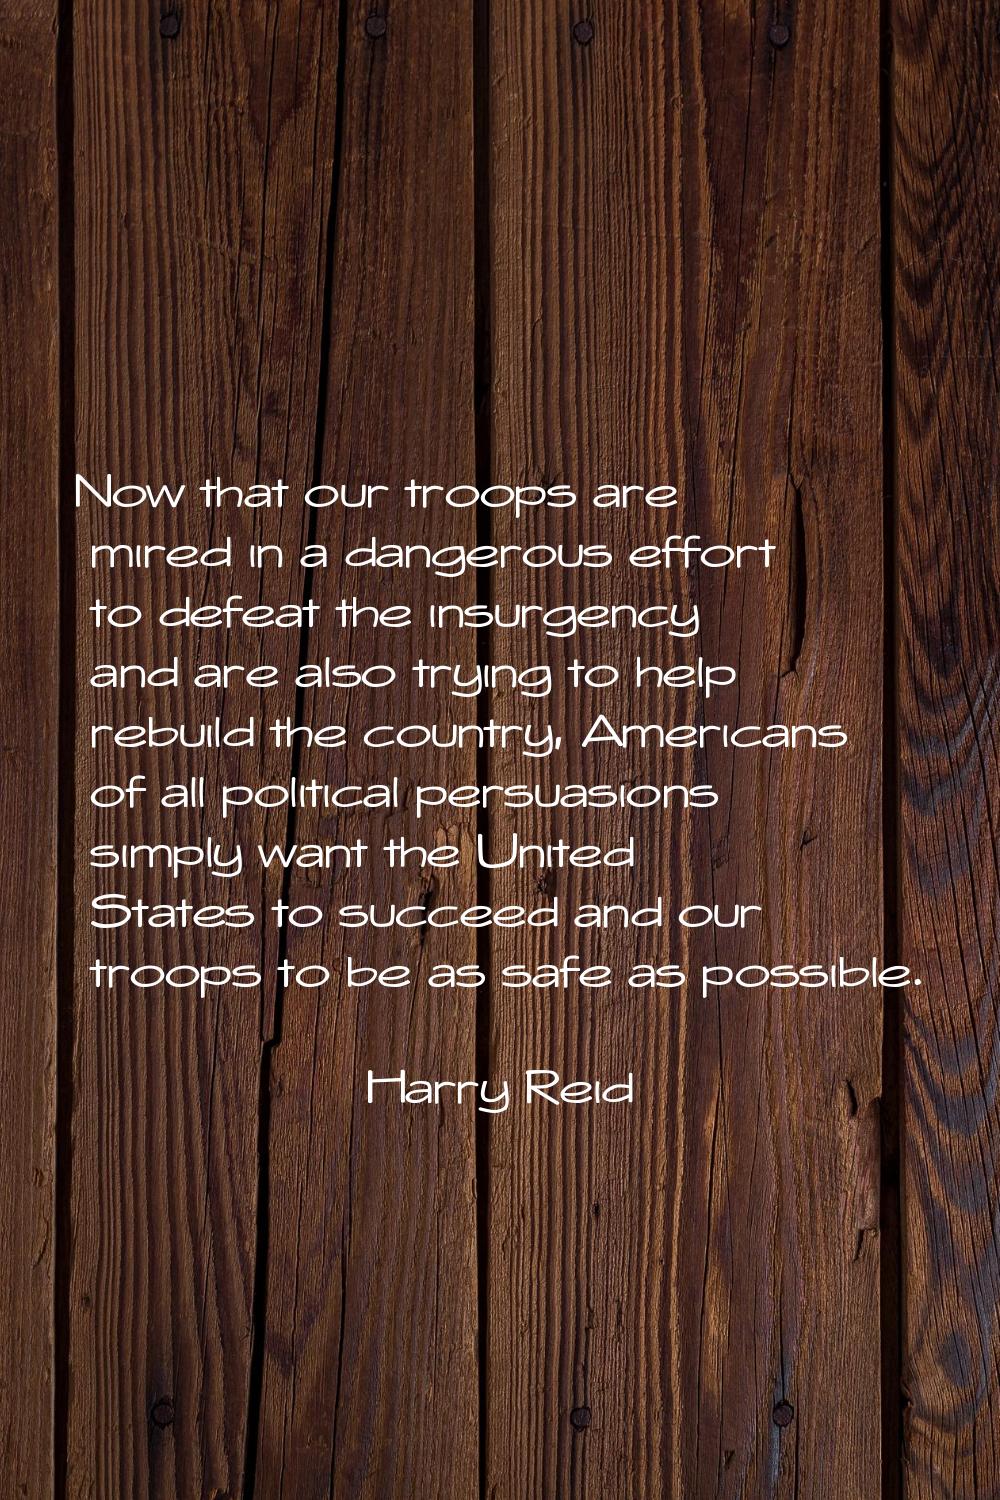 Now that our troops are mired in a dangerous effort to defeat the insurgency and are also trying to